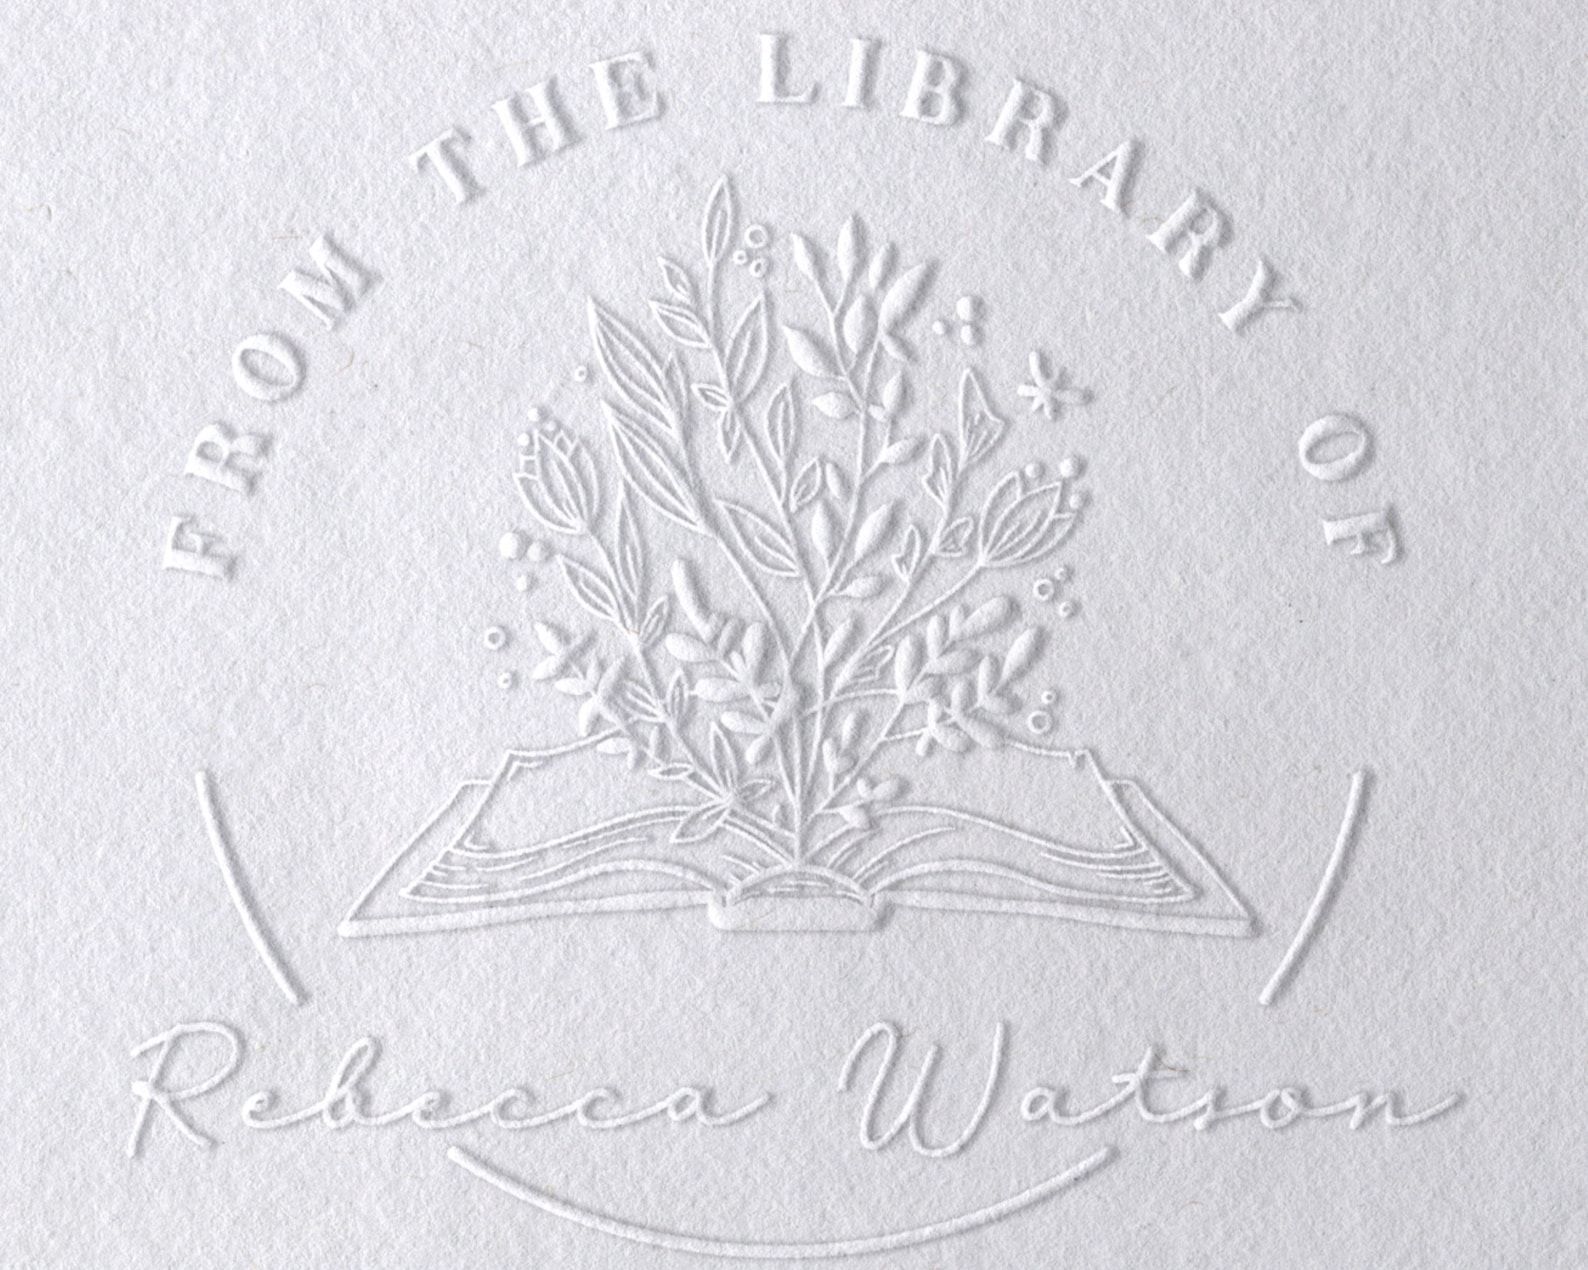 A white page wooing an embossed stamp that reads "from the library of ________" and an open book with flowers